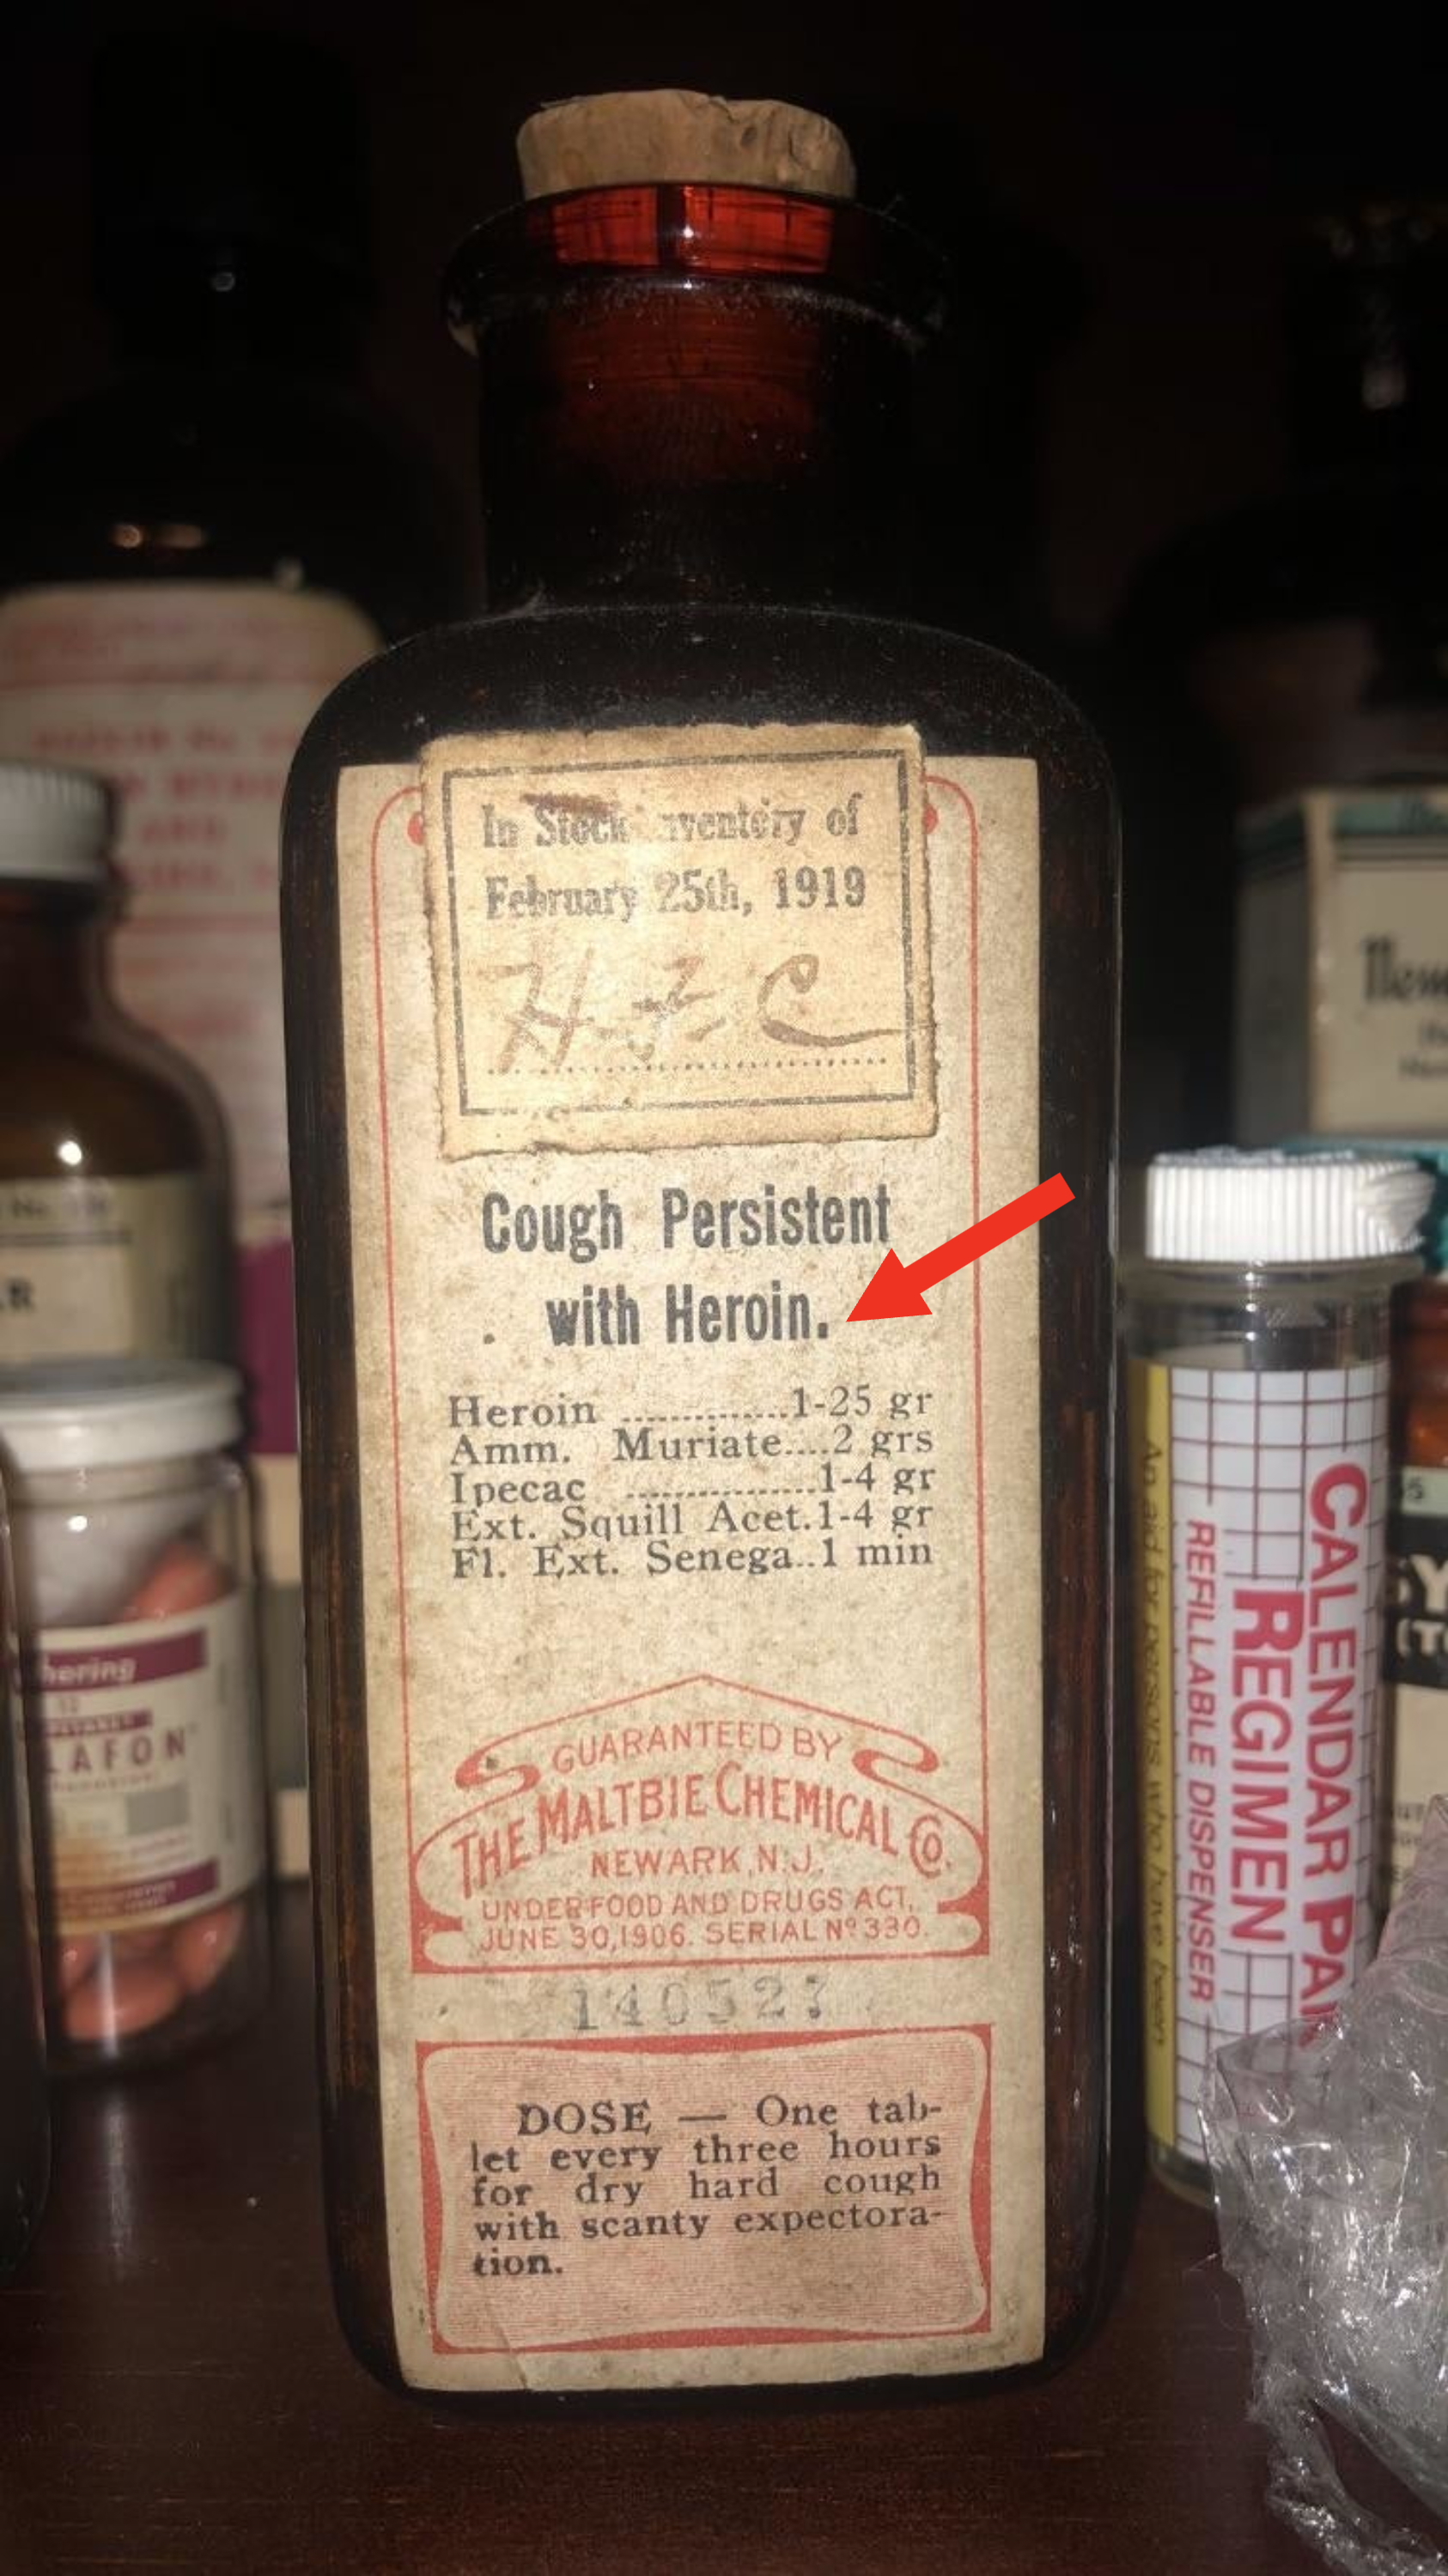 Arrow pointing to heroin on the label of a very old bottle: &quot;Cough Persistent With Heroin&quot;: Dose is &quot;one tablet every three hours for dry hard cough with scanty expectoration&quot;